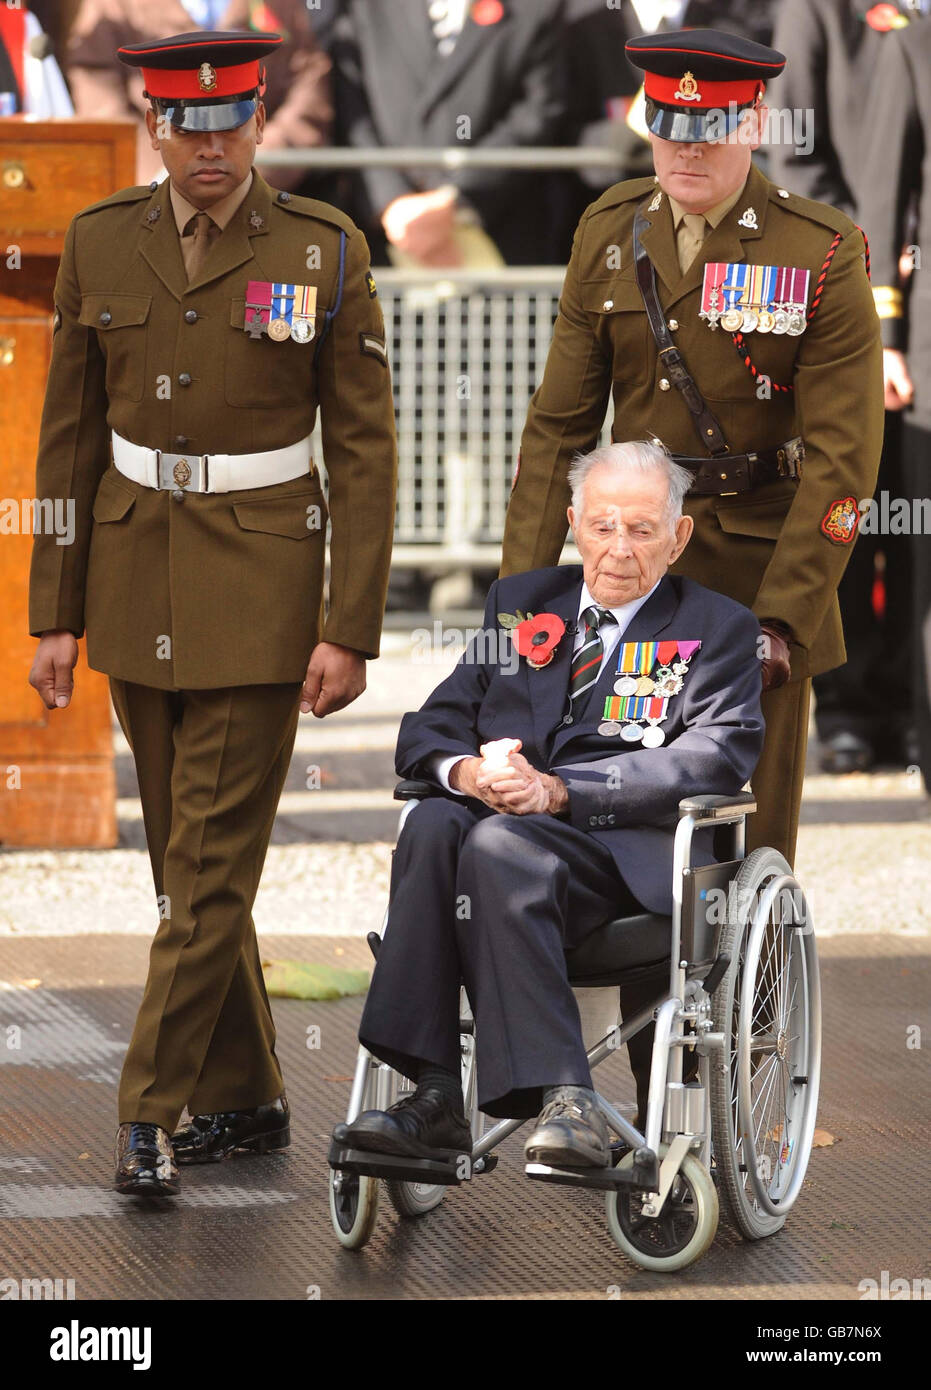 One of the three of the last surviving veterans of the First World War, Harry Patch, 110, withg Johnson Beharry at the Armistice Day Commemoration Ceremony at the Centotaph in Whitehall, London. Stock Photo